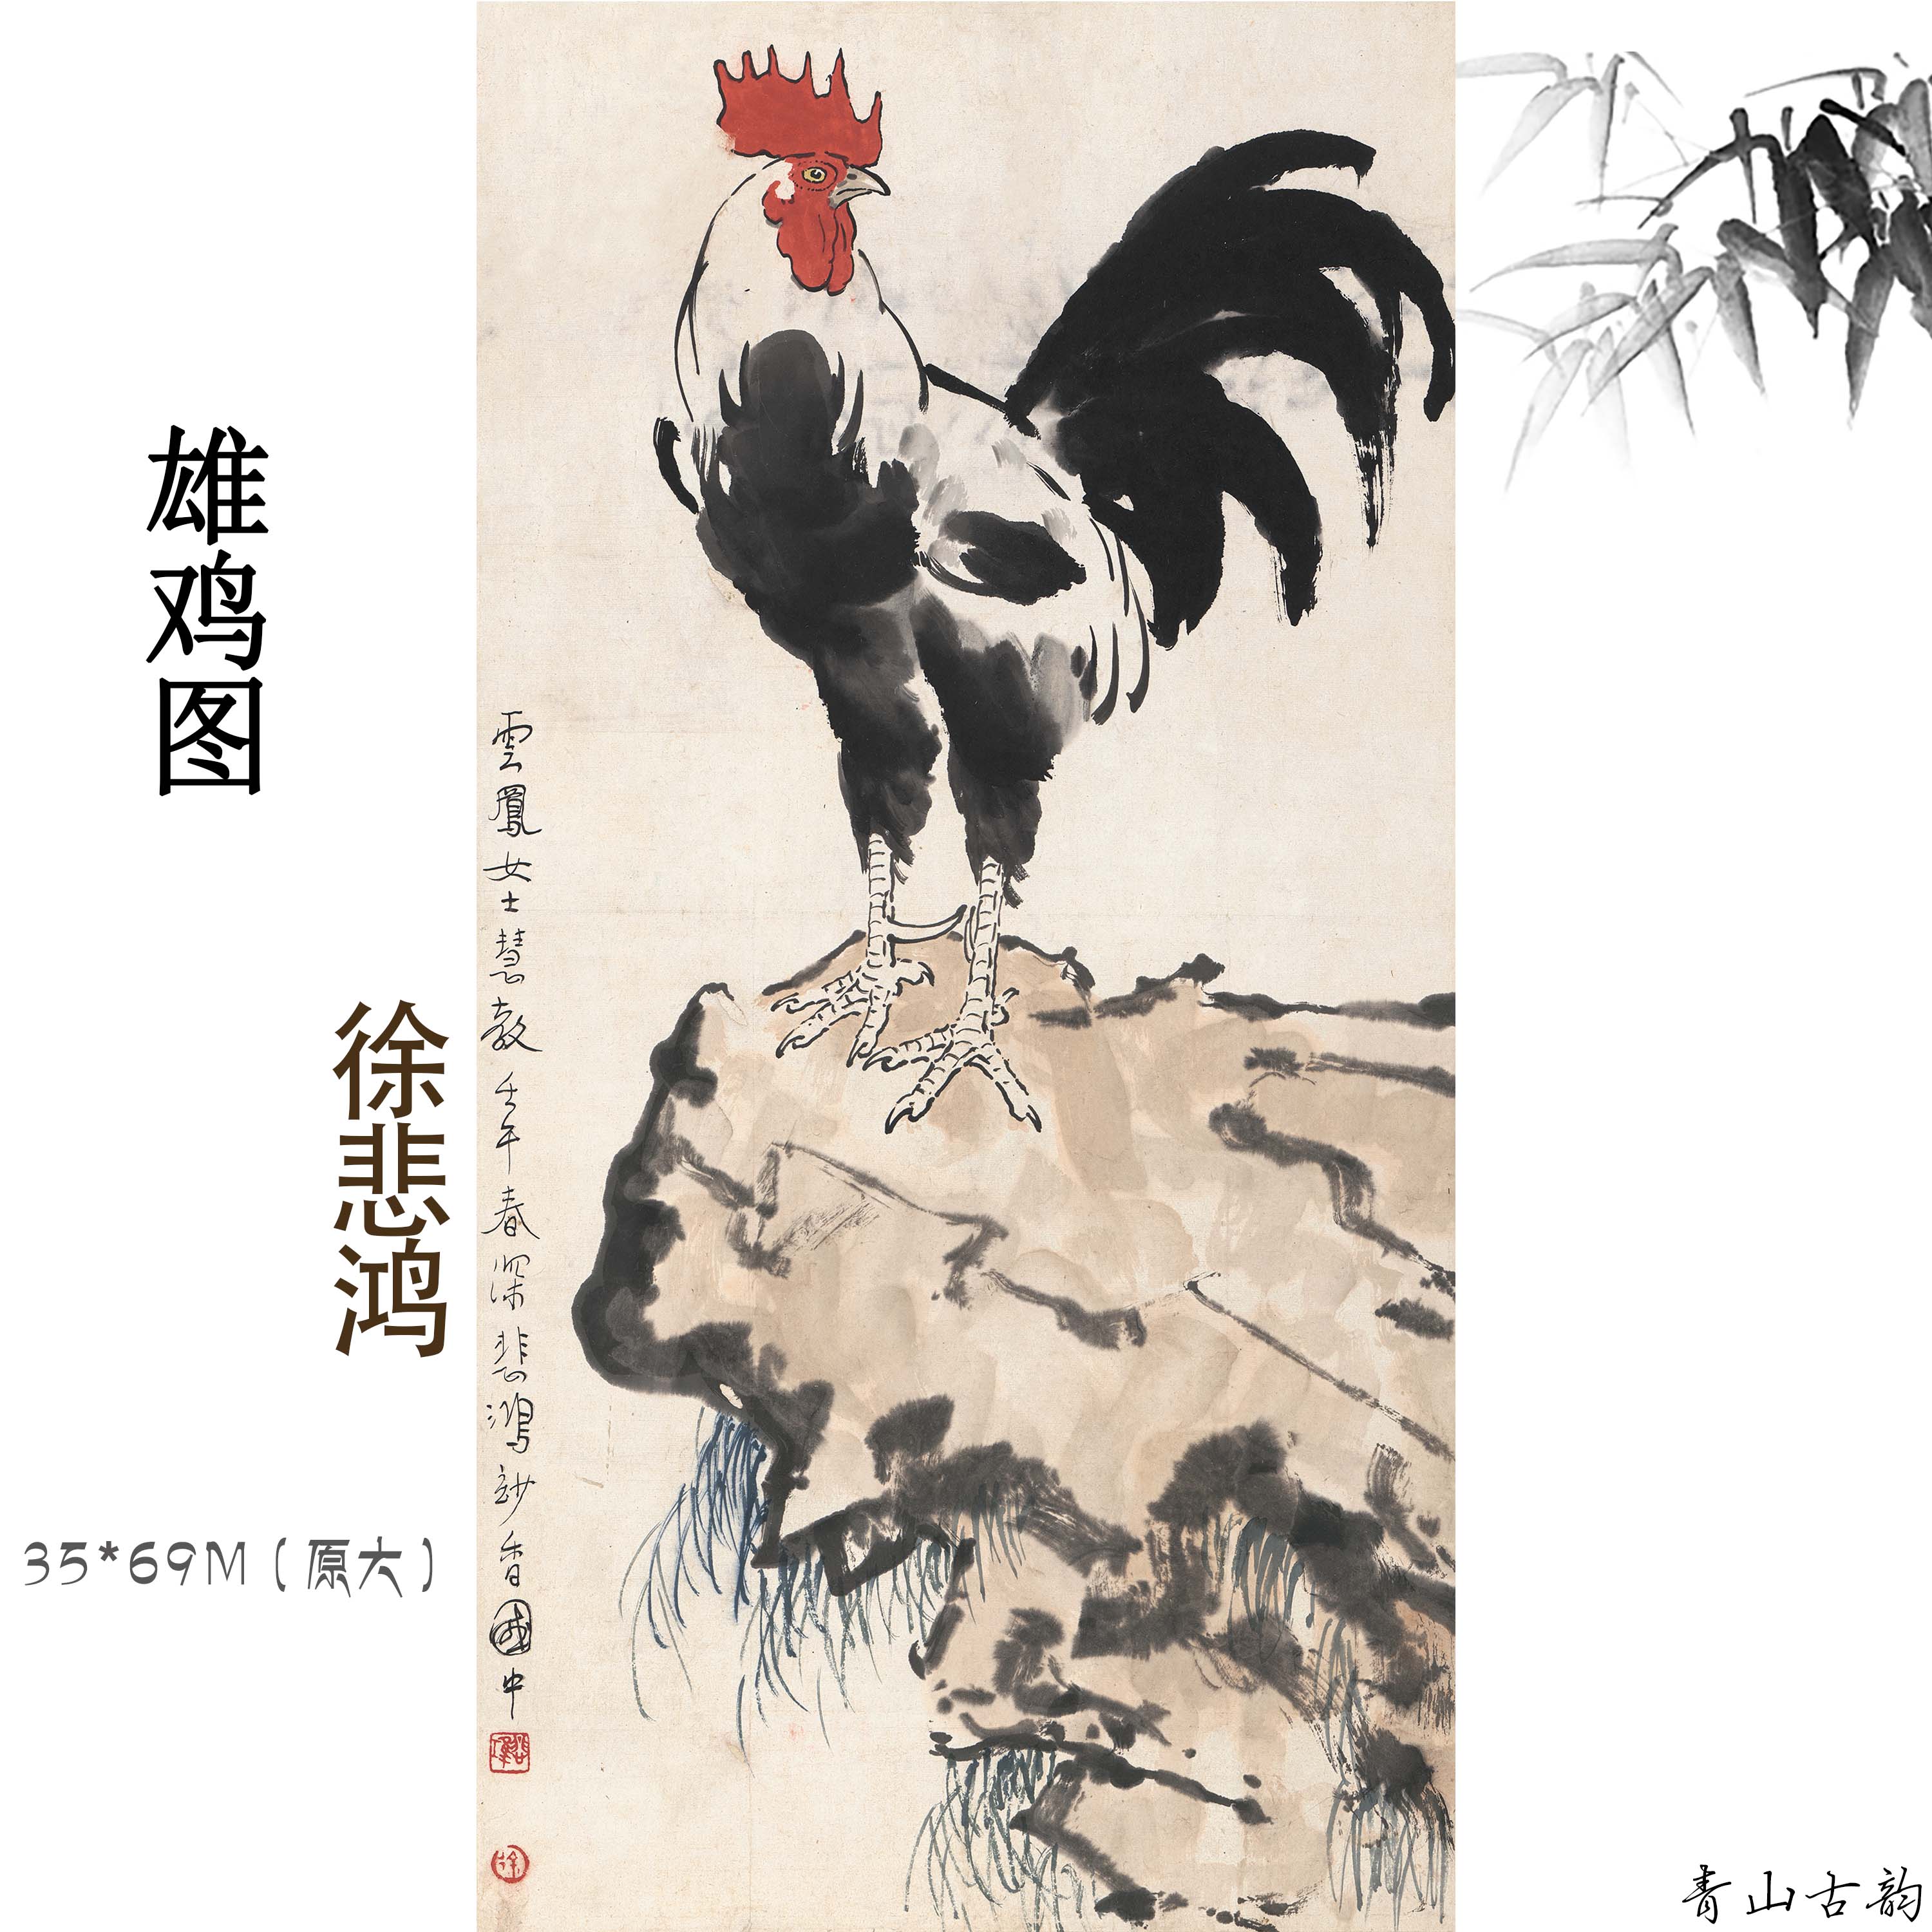 Chinese Antique Art Painting 徐悲鸿 雄鸡图 Xu Beihong Rooster